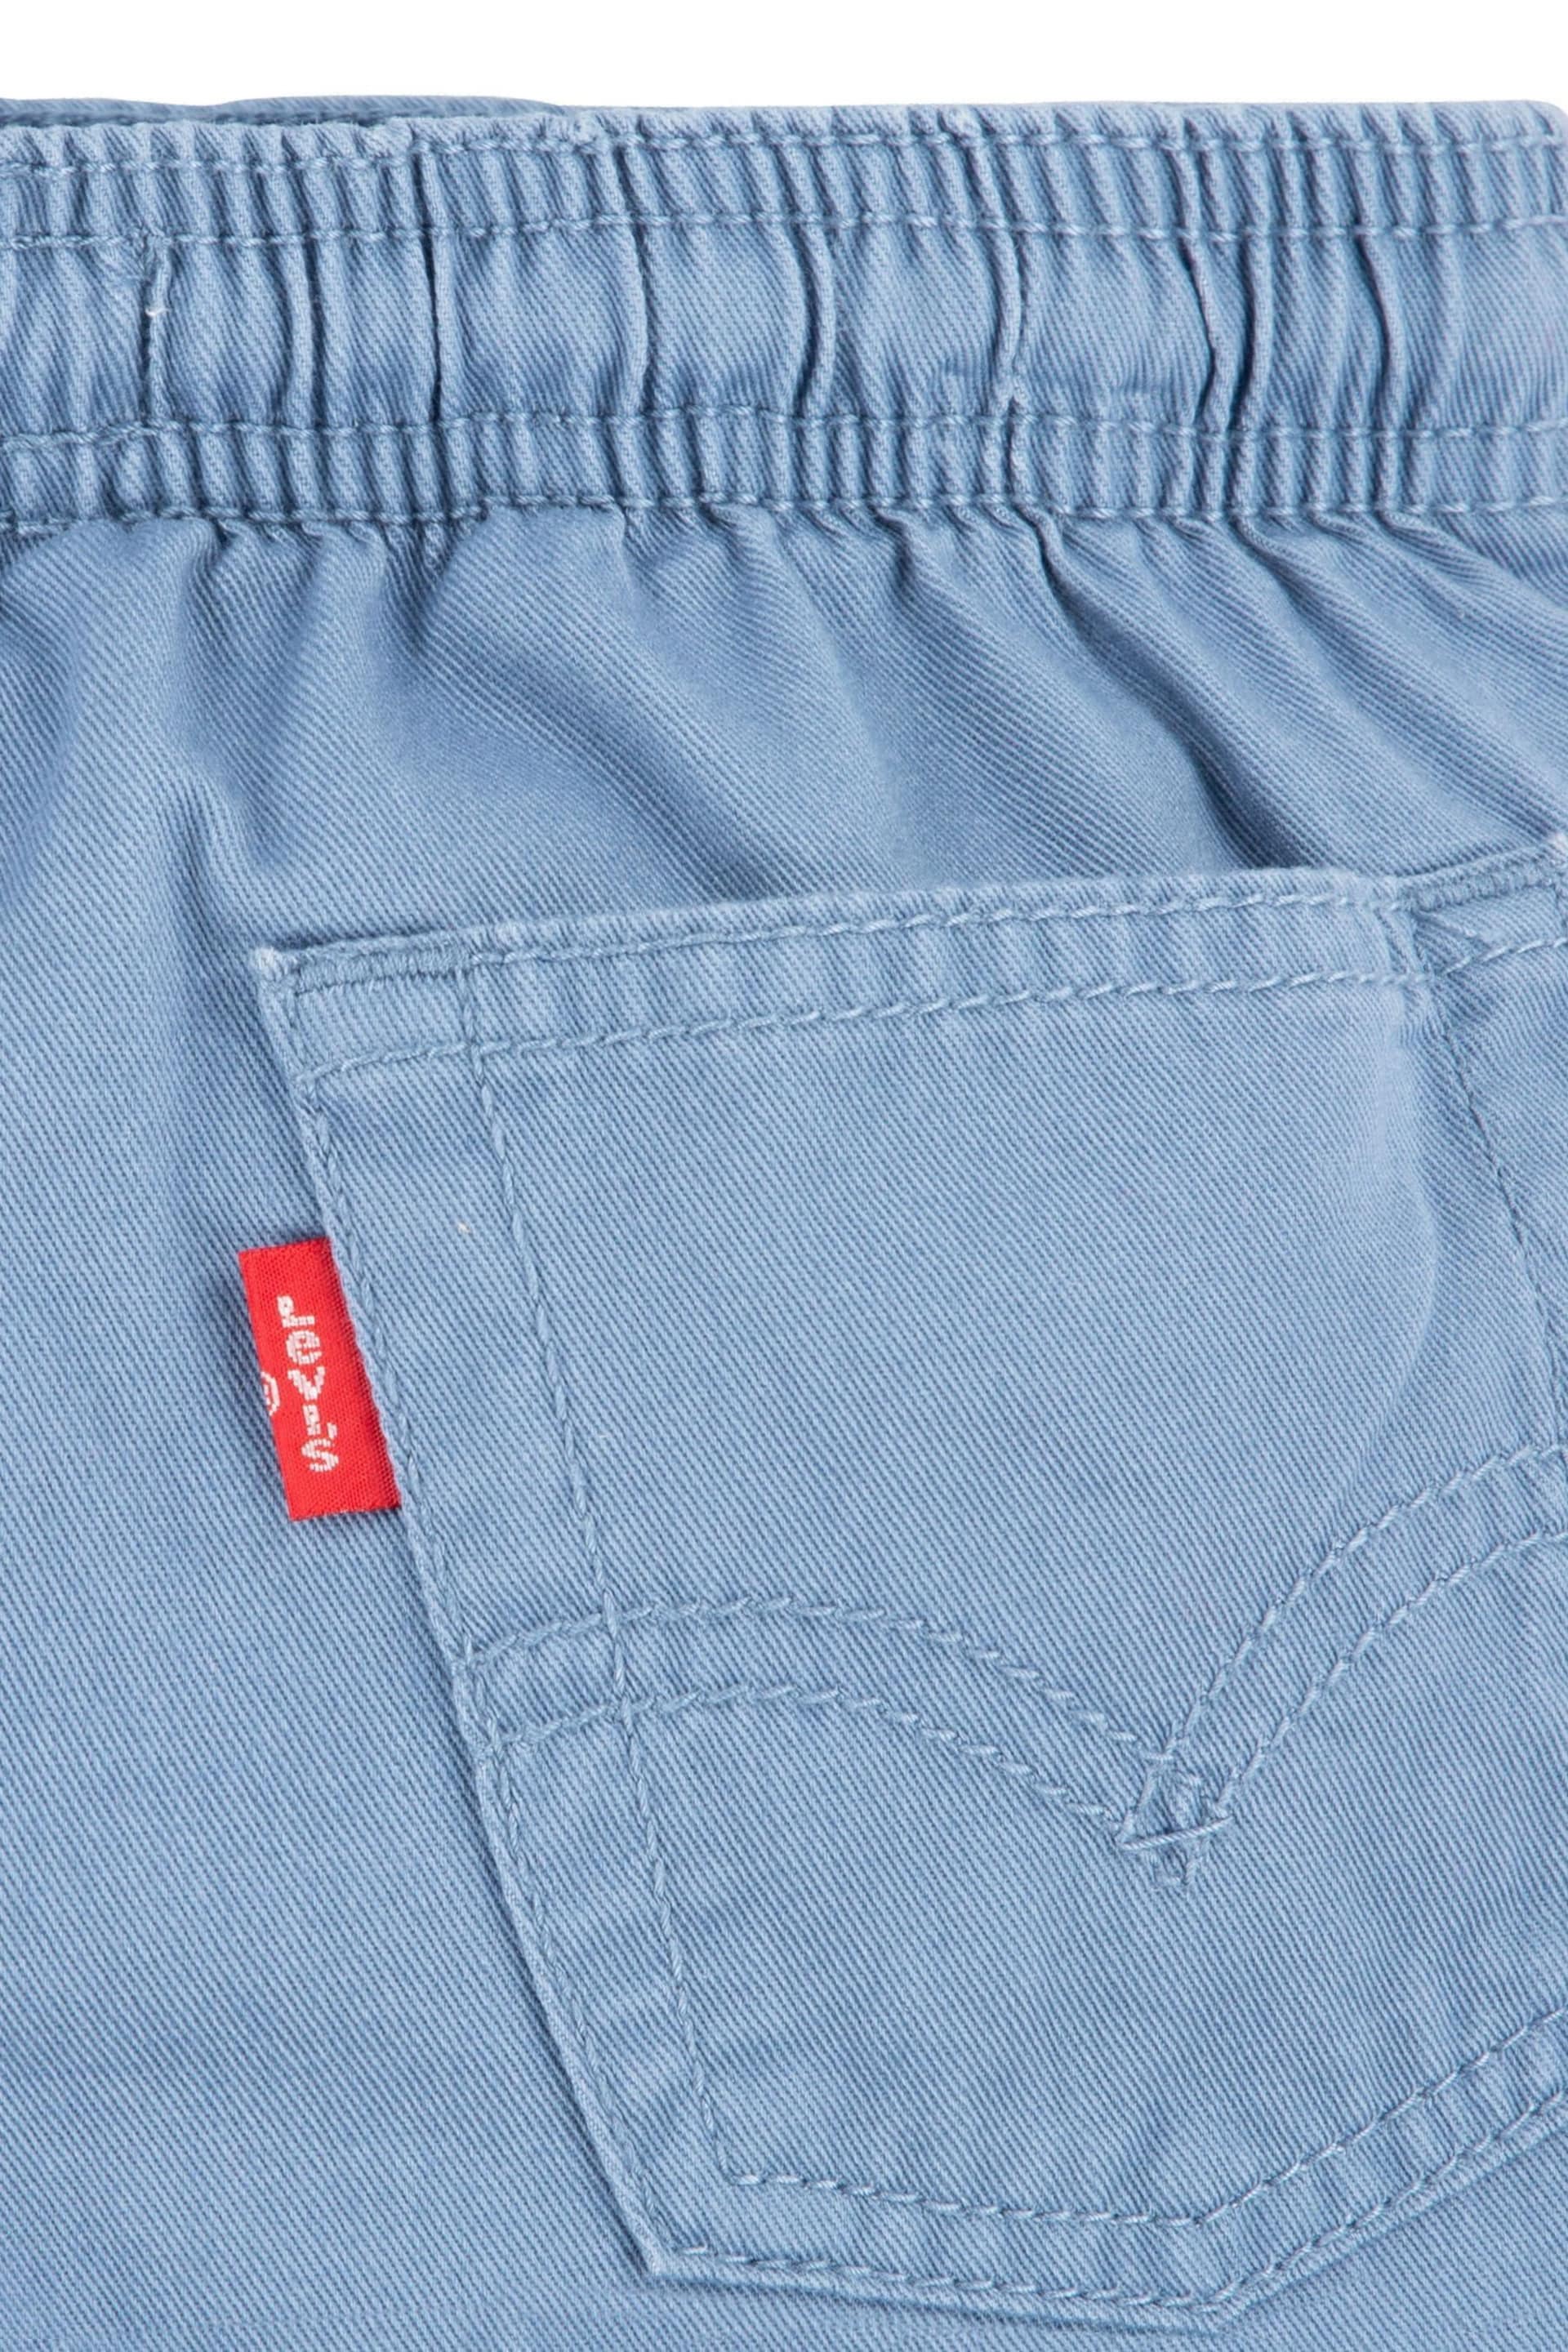 Levi's® Blue Pull-On Woven Shorts - Image 4 of 4